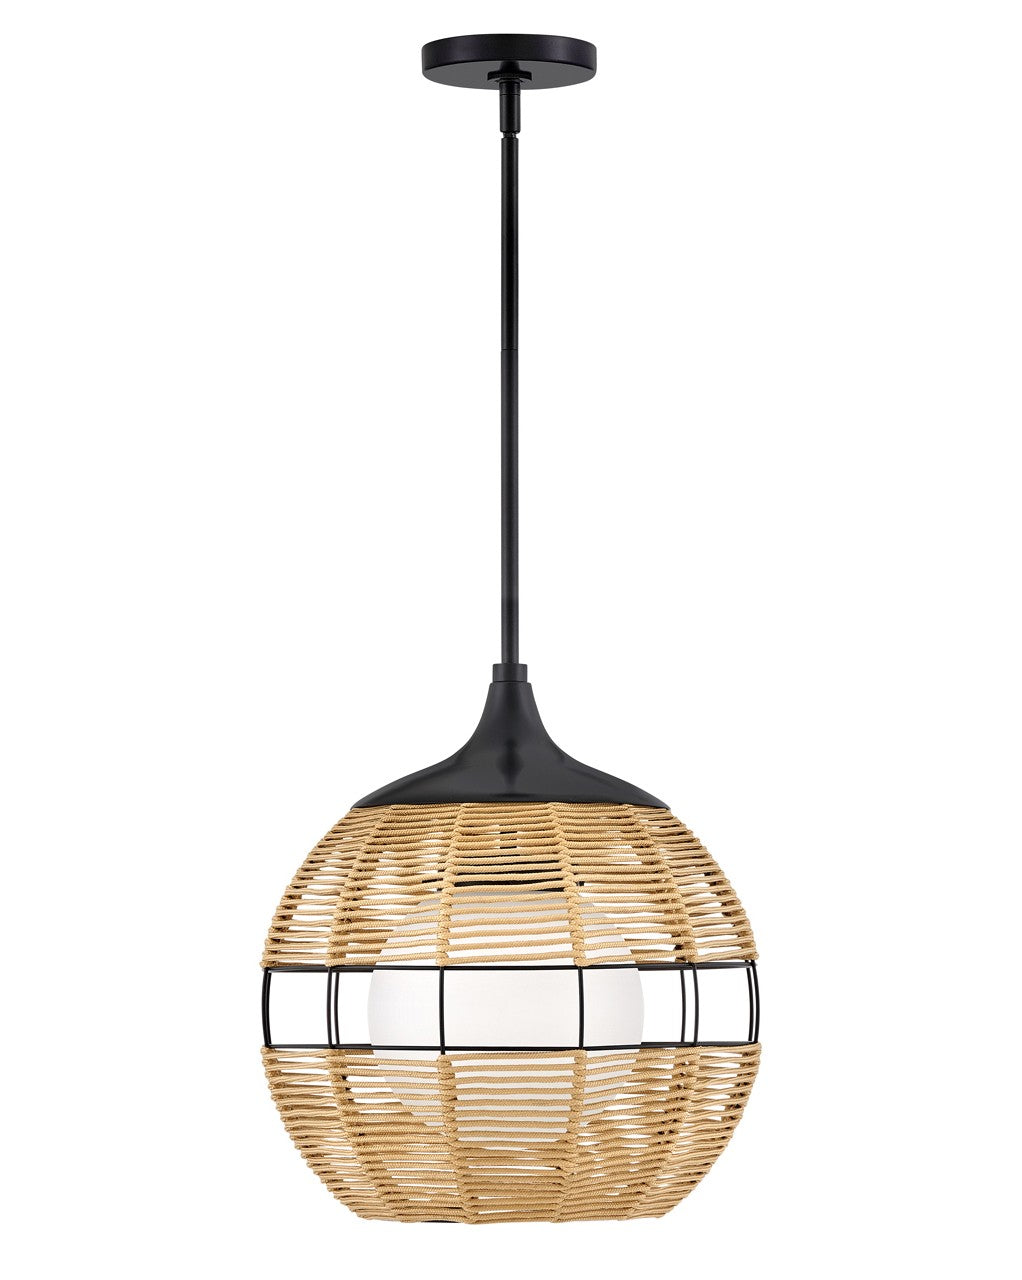 Maddox LED Pendant in Black with Light Natural Nylon Shade by Hinkley Lighting